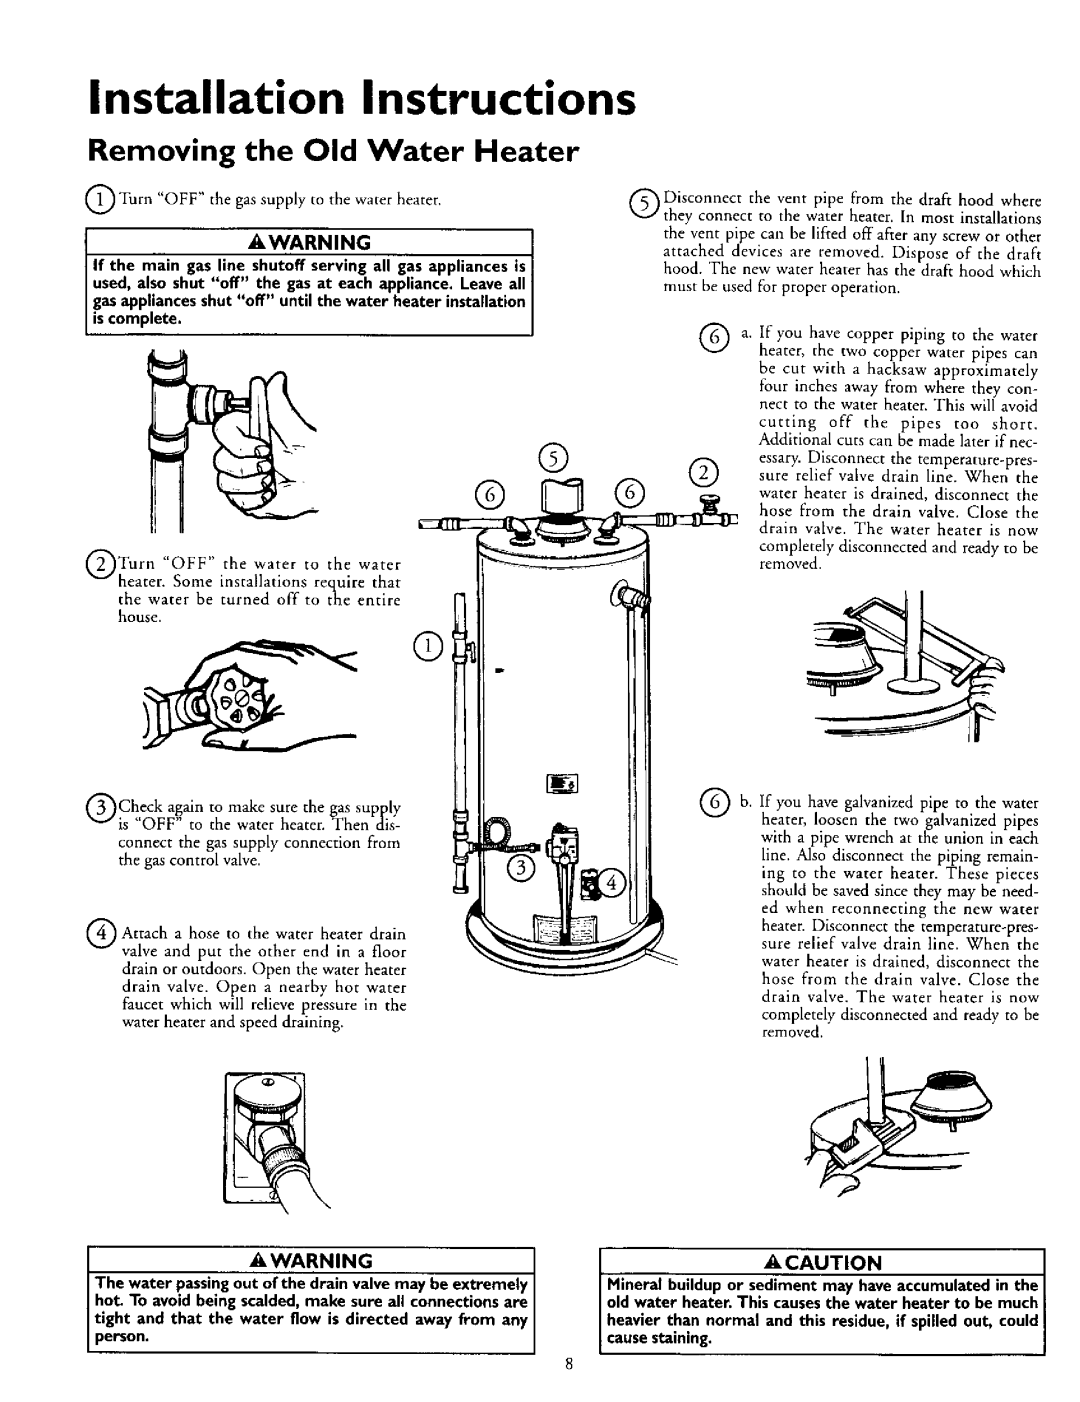 Kenmore 153.335845, L53.335816, 153.335942, 153.335962 Installation Instructions, Removing the Old Water Heater, A Caution 